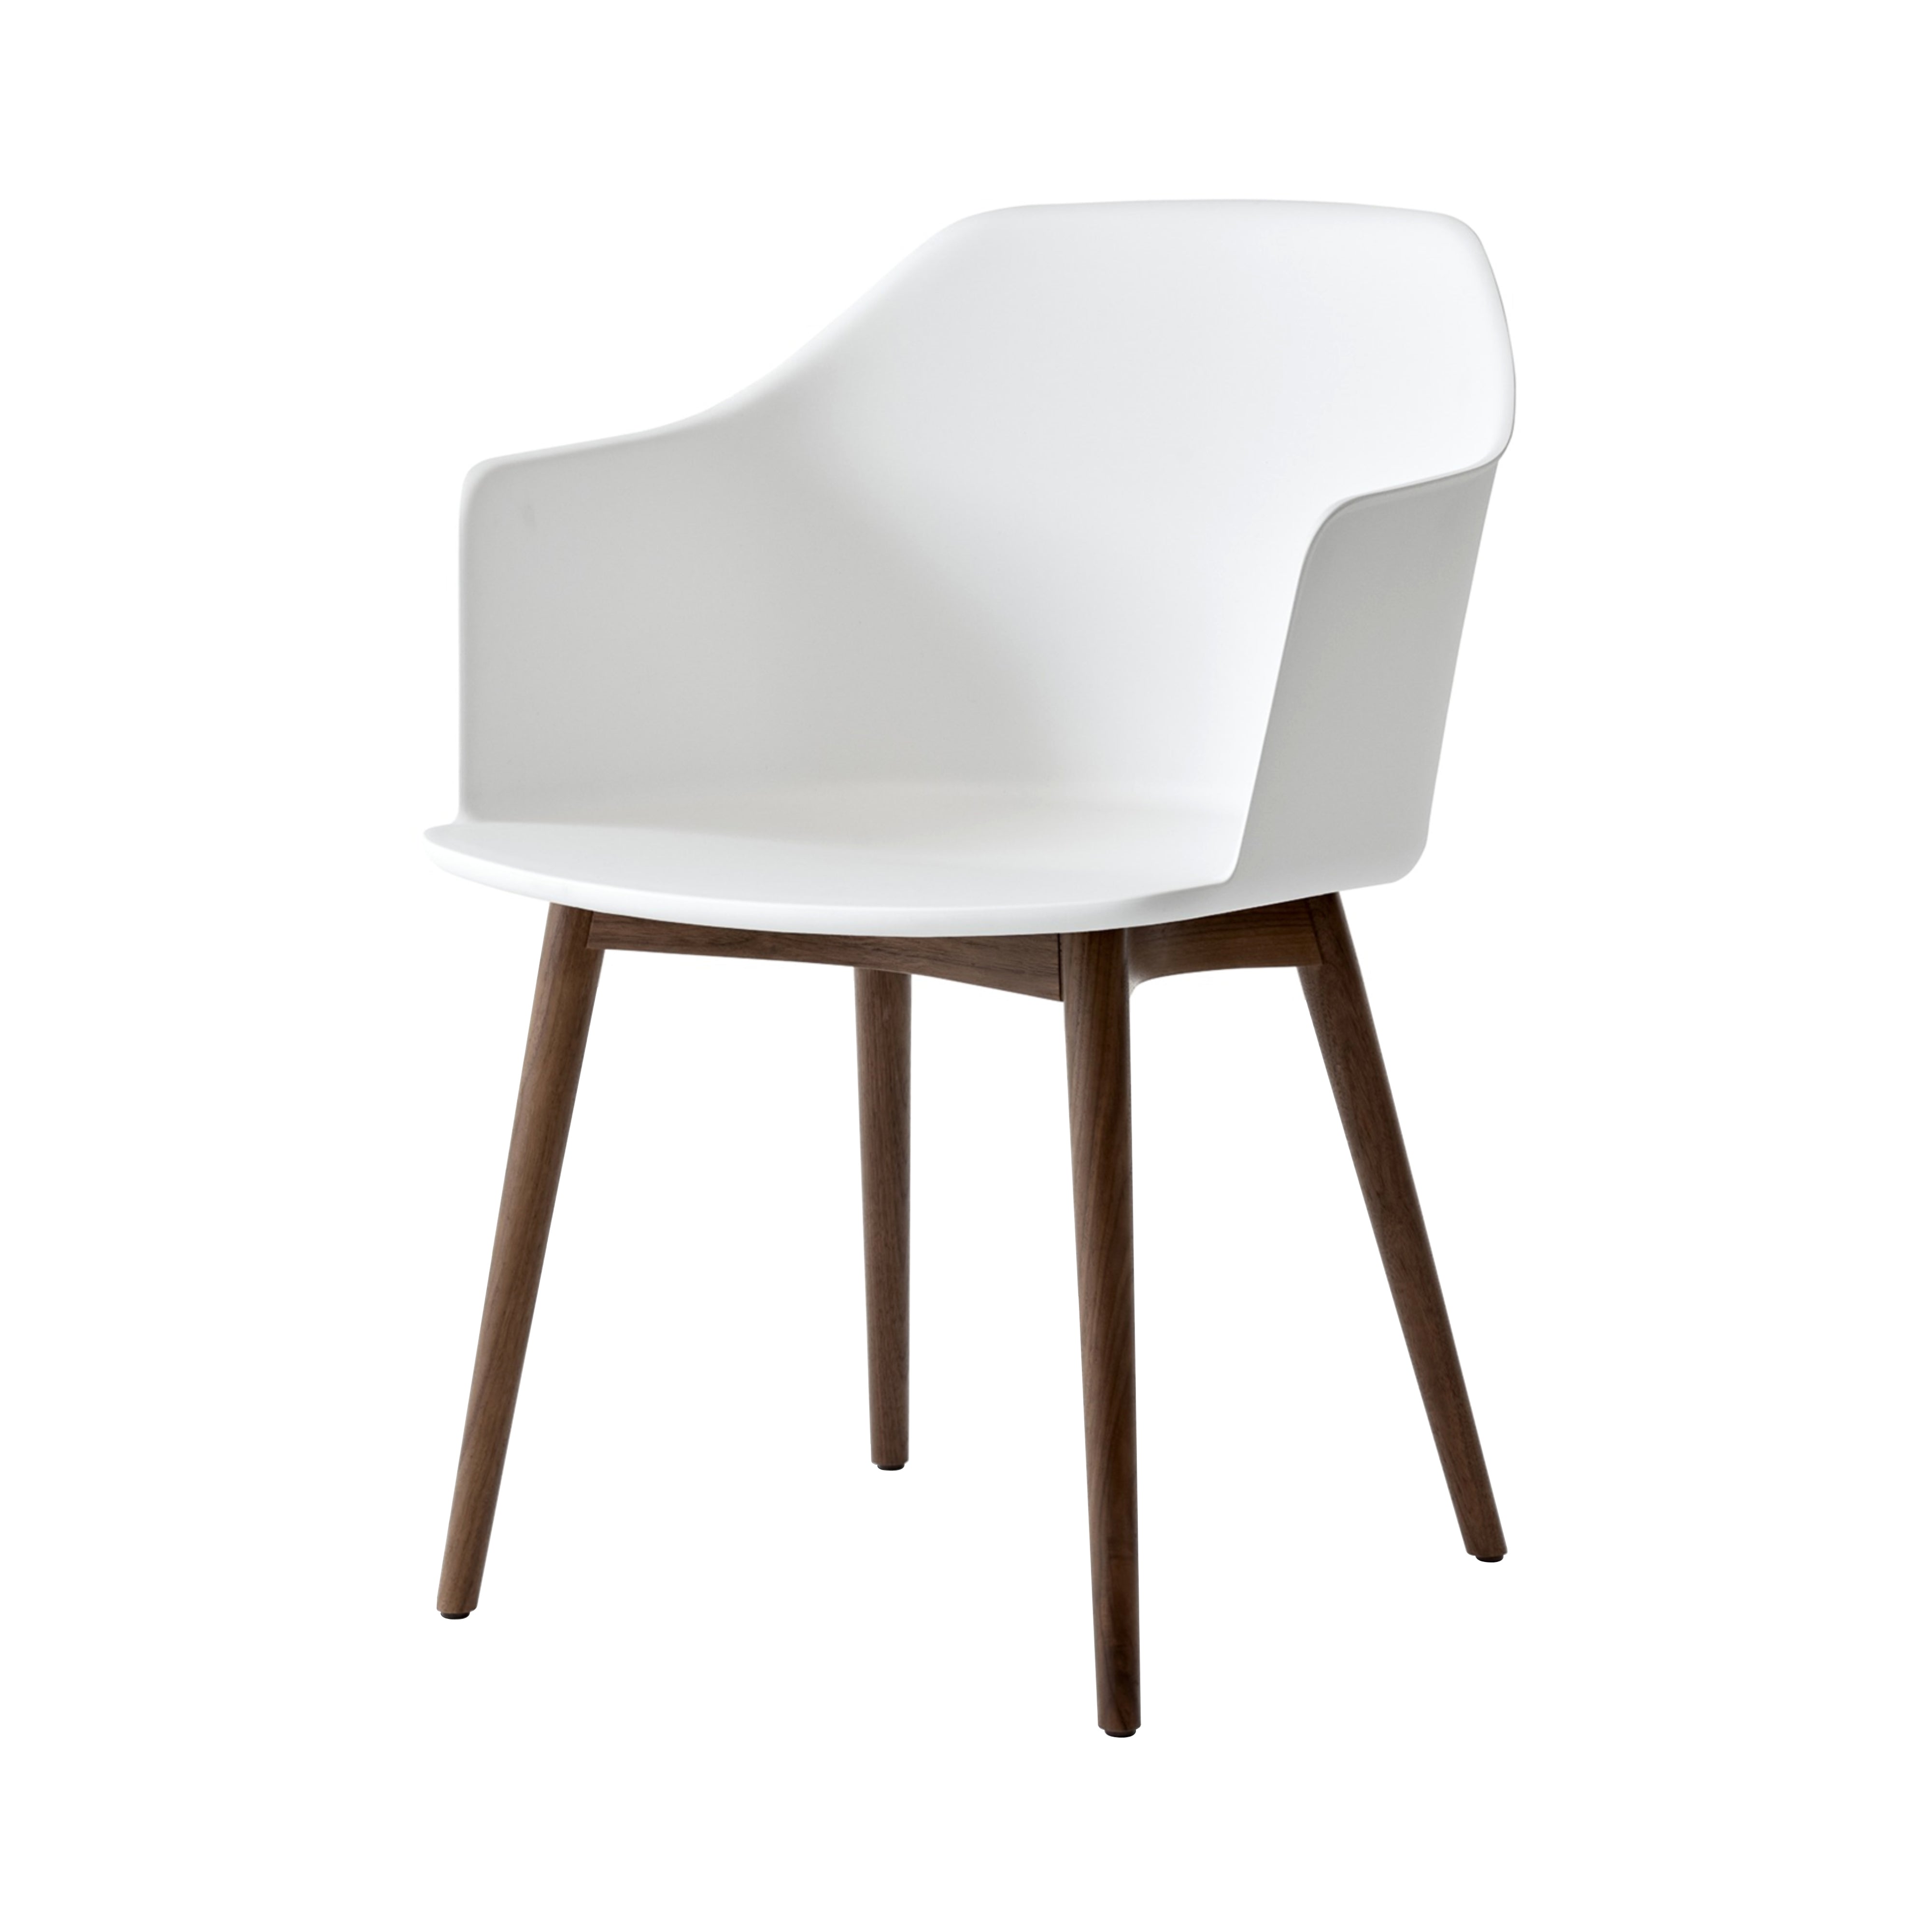 Rely Chair HW76: White + Walnut